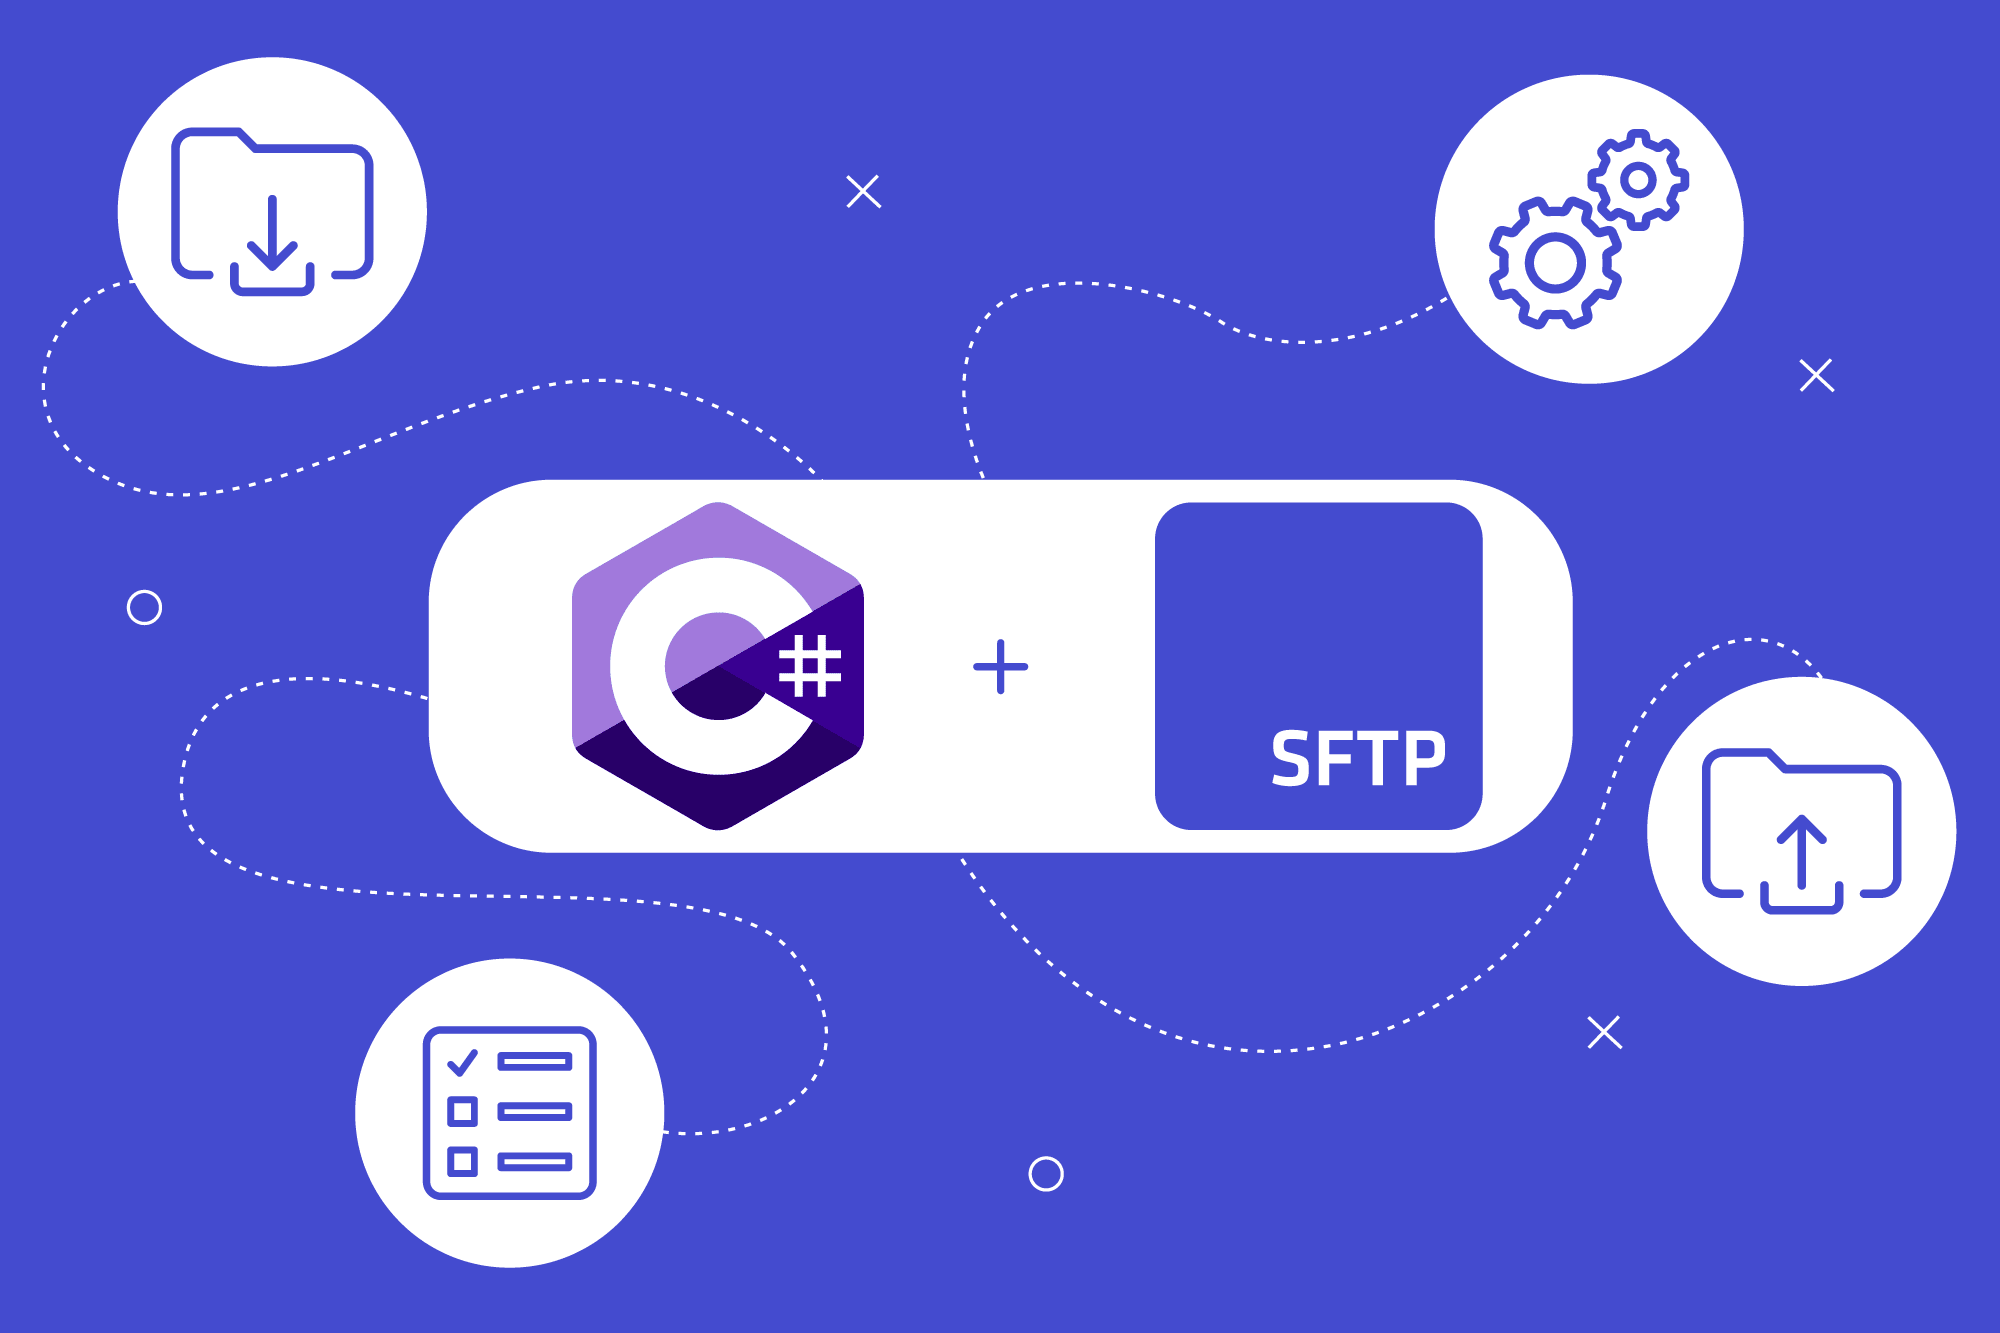 How To Connect To SFTP In C# With SFTP To Go